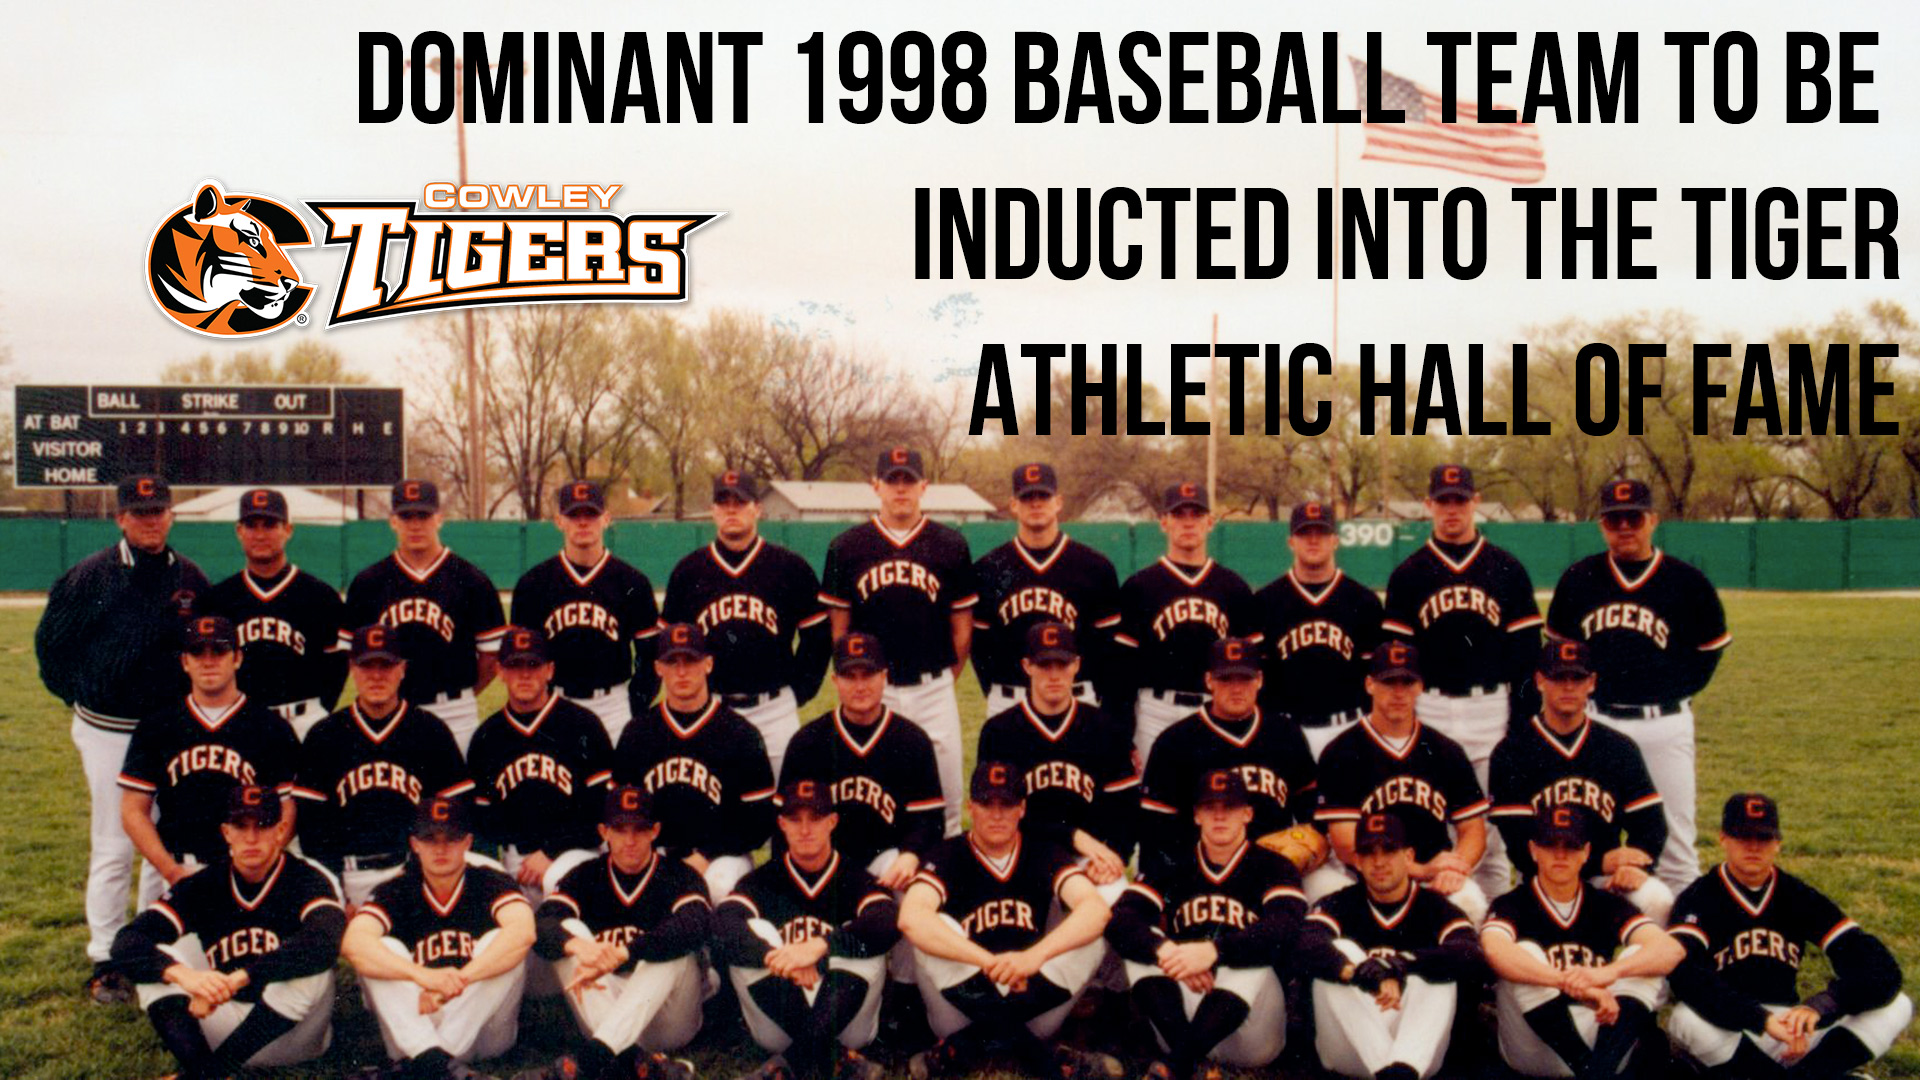 Dominant 1998 baseball team to be inducted into the Tiger Athletic Hall of Fame